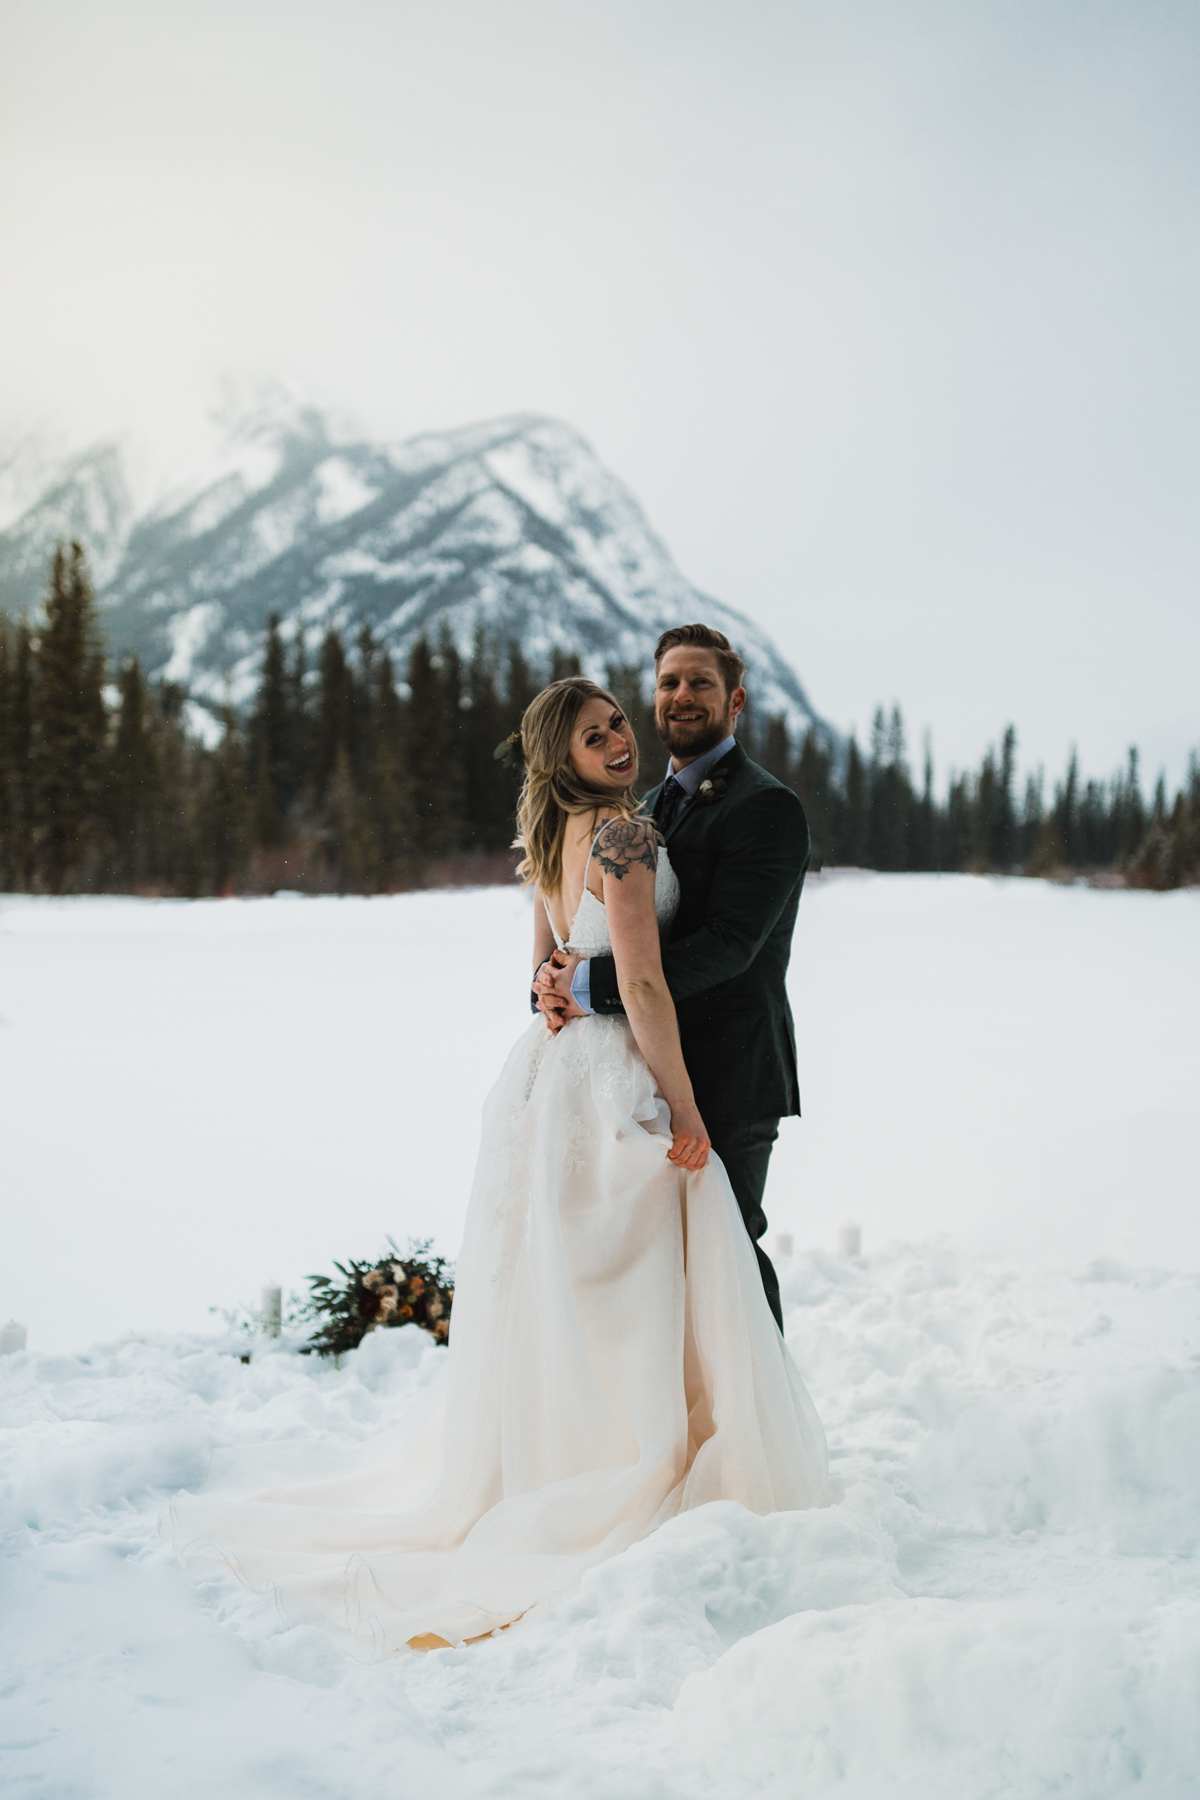 Canmore Elopement Photographer in the Canadian Rockies - Image 34